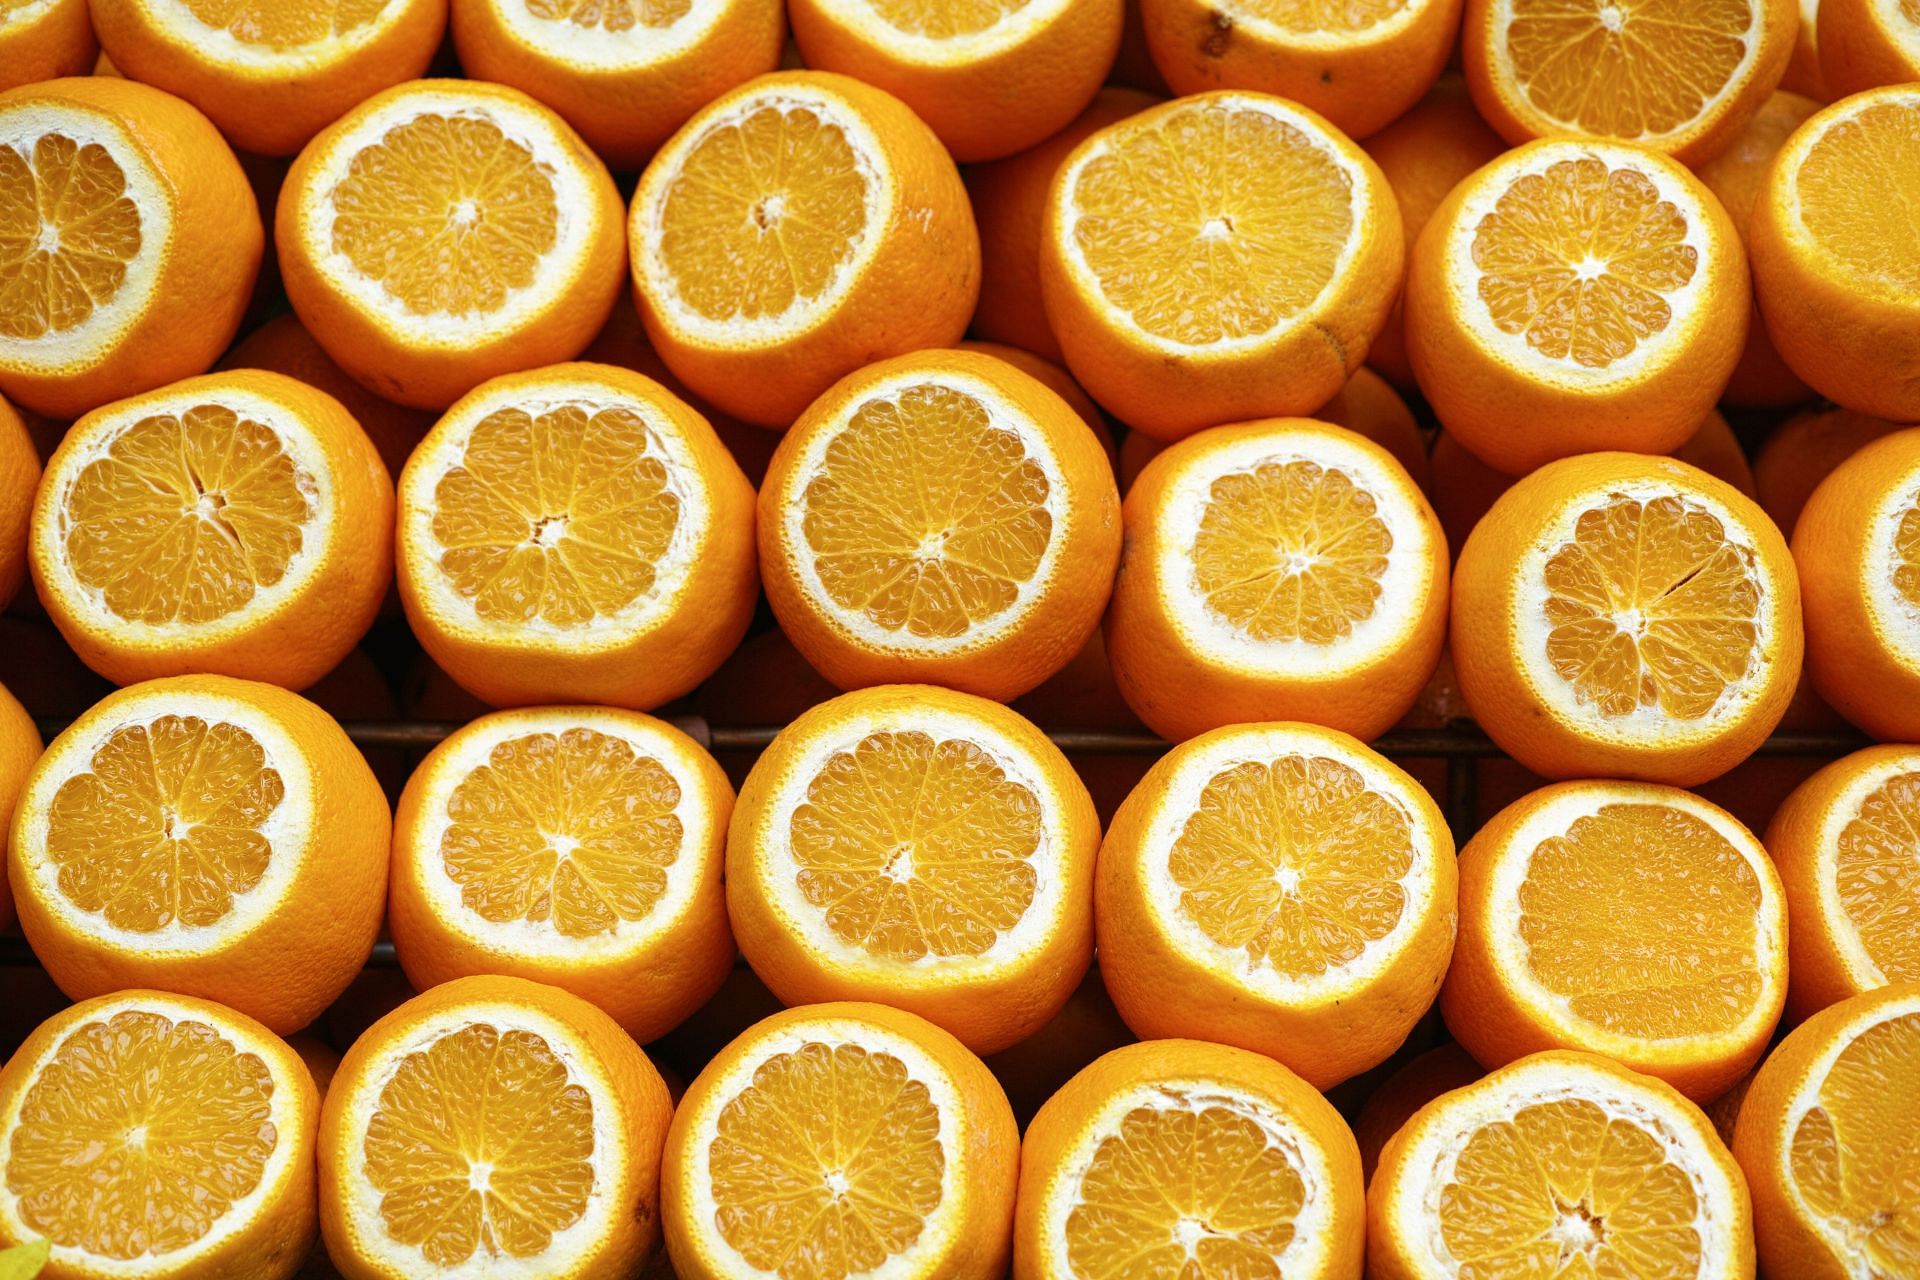 Get a healthy glow with our vitamin C infusion. (Image via Pexels)